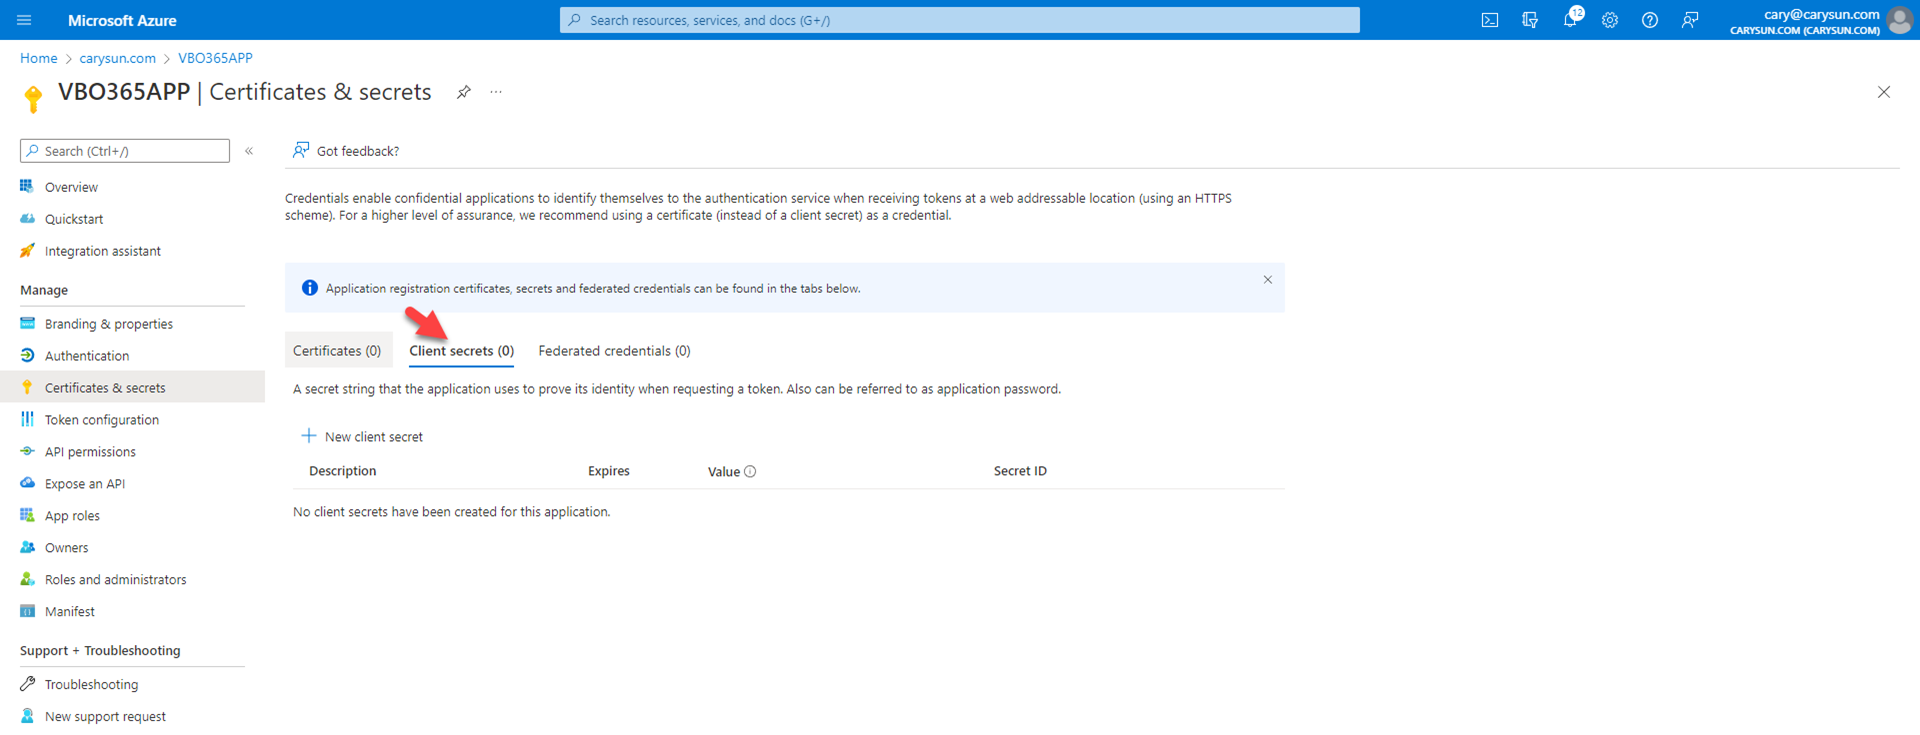 042022 1642 Howtoconfig51 - How to configure Azure AD Application Permissions for Modern App-Only Authentication of Veeam Backup for Microsoft 365